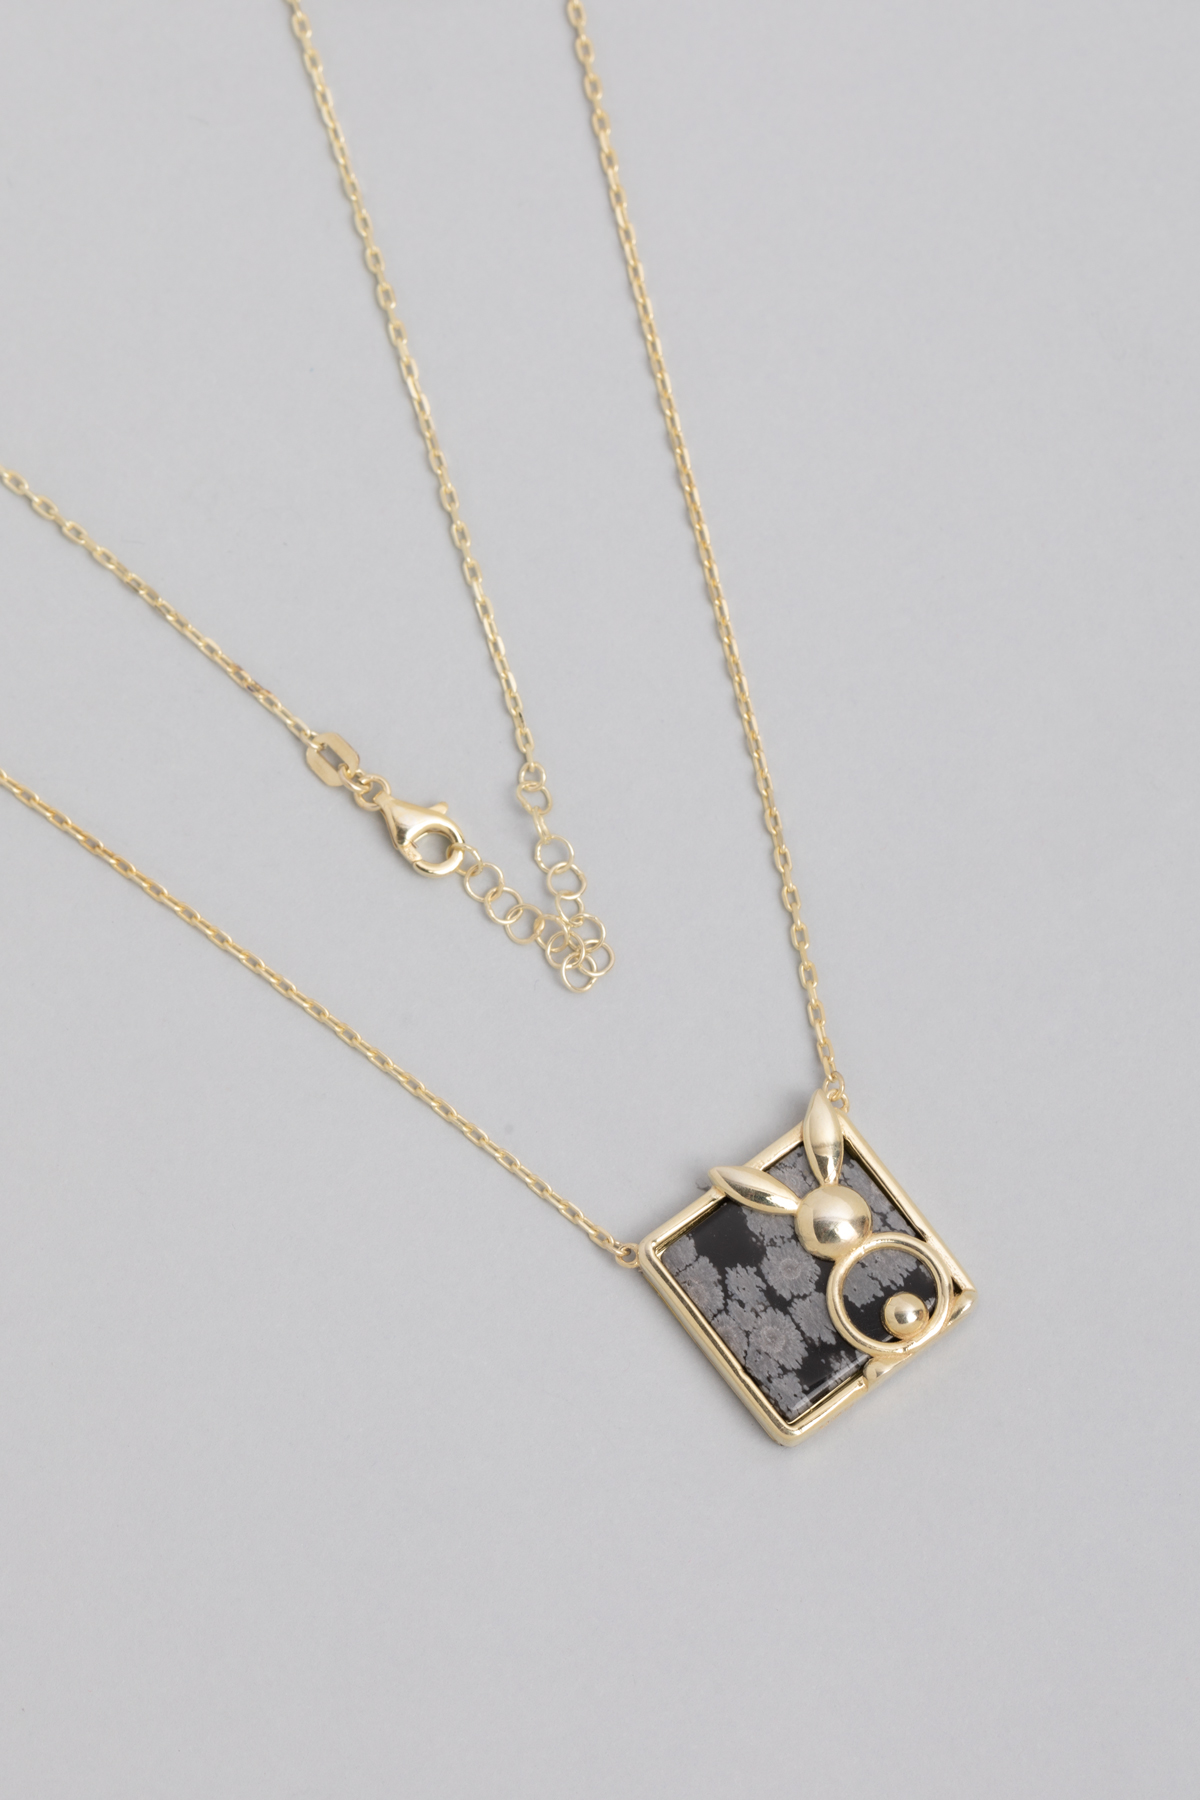 18K Yellow Gold Plated Silver Rabbit Necklace with Dalmatian Stone